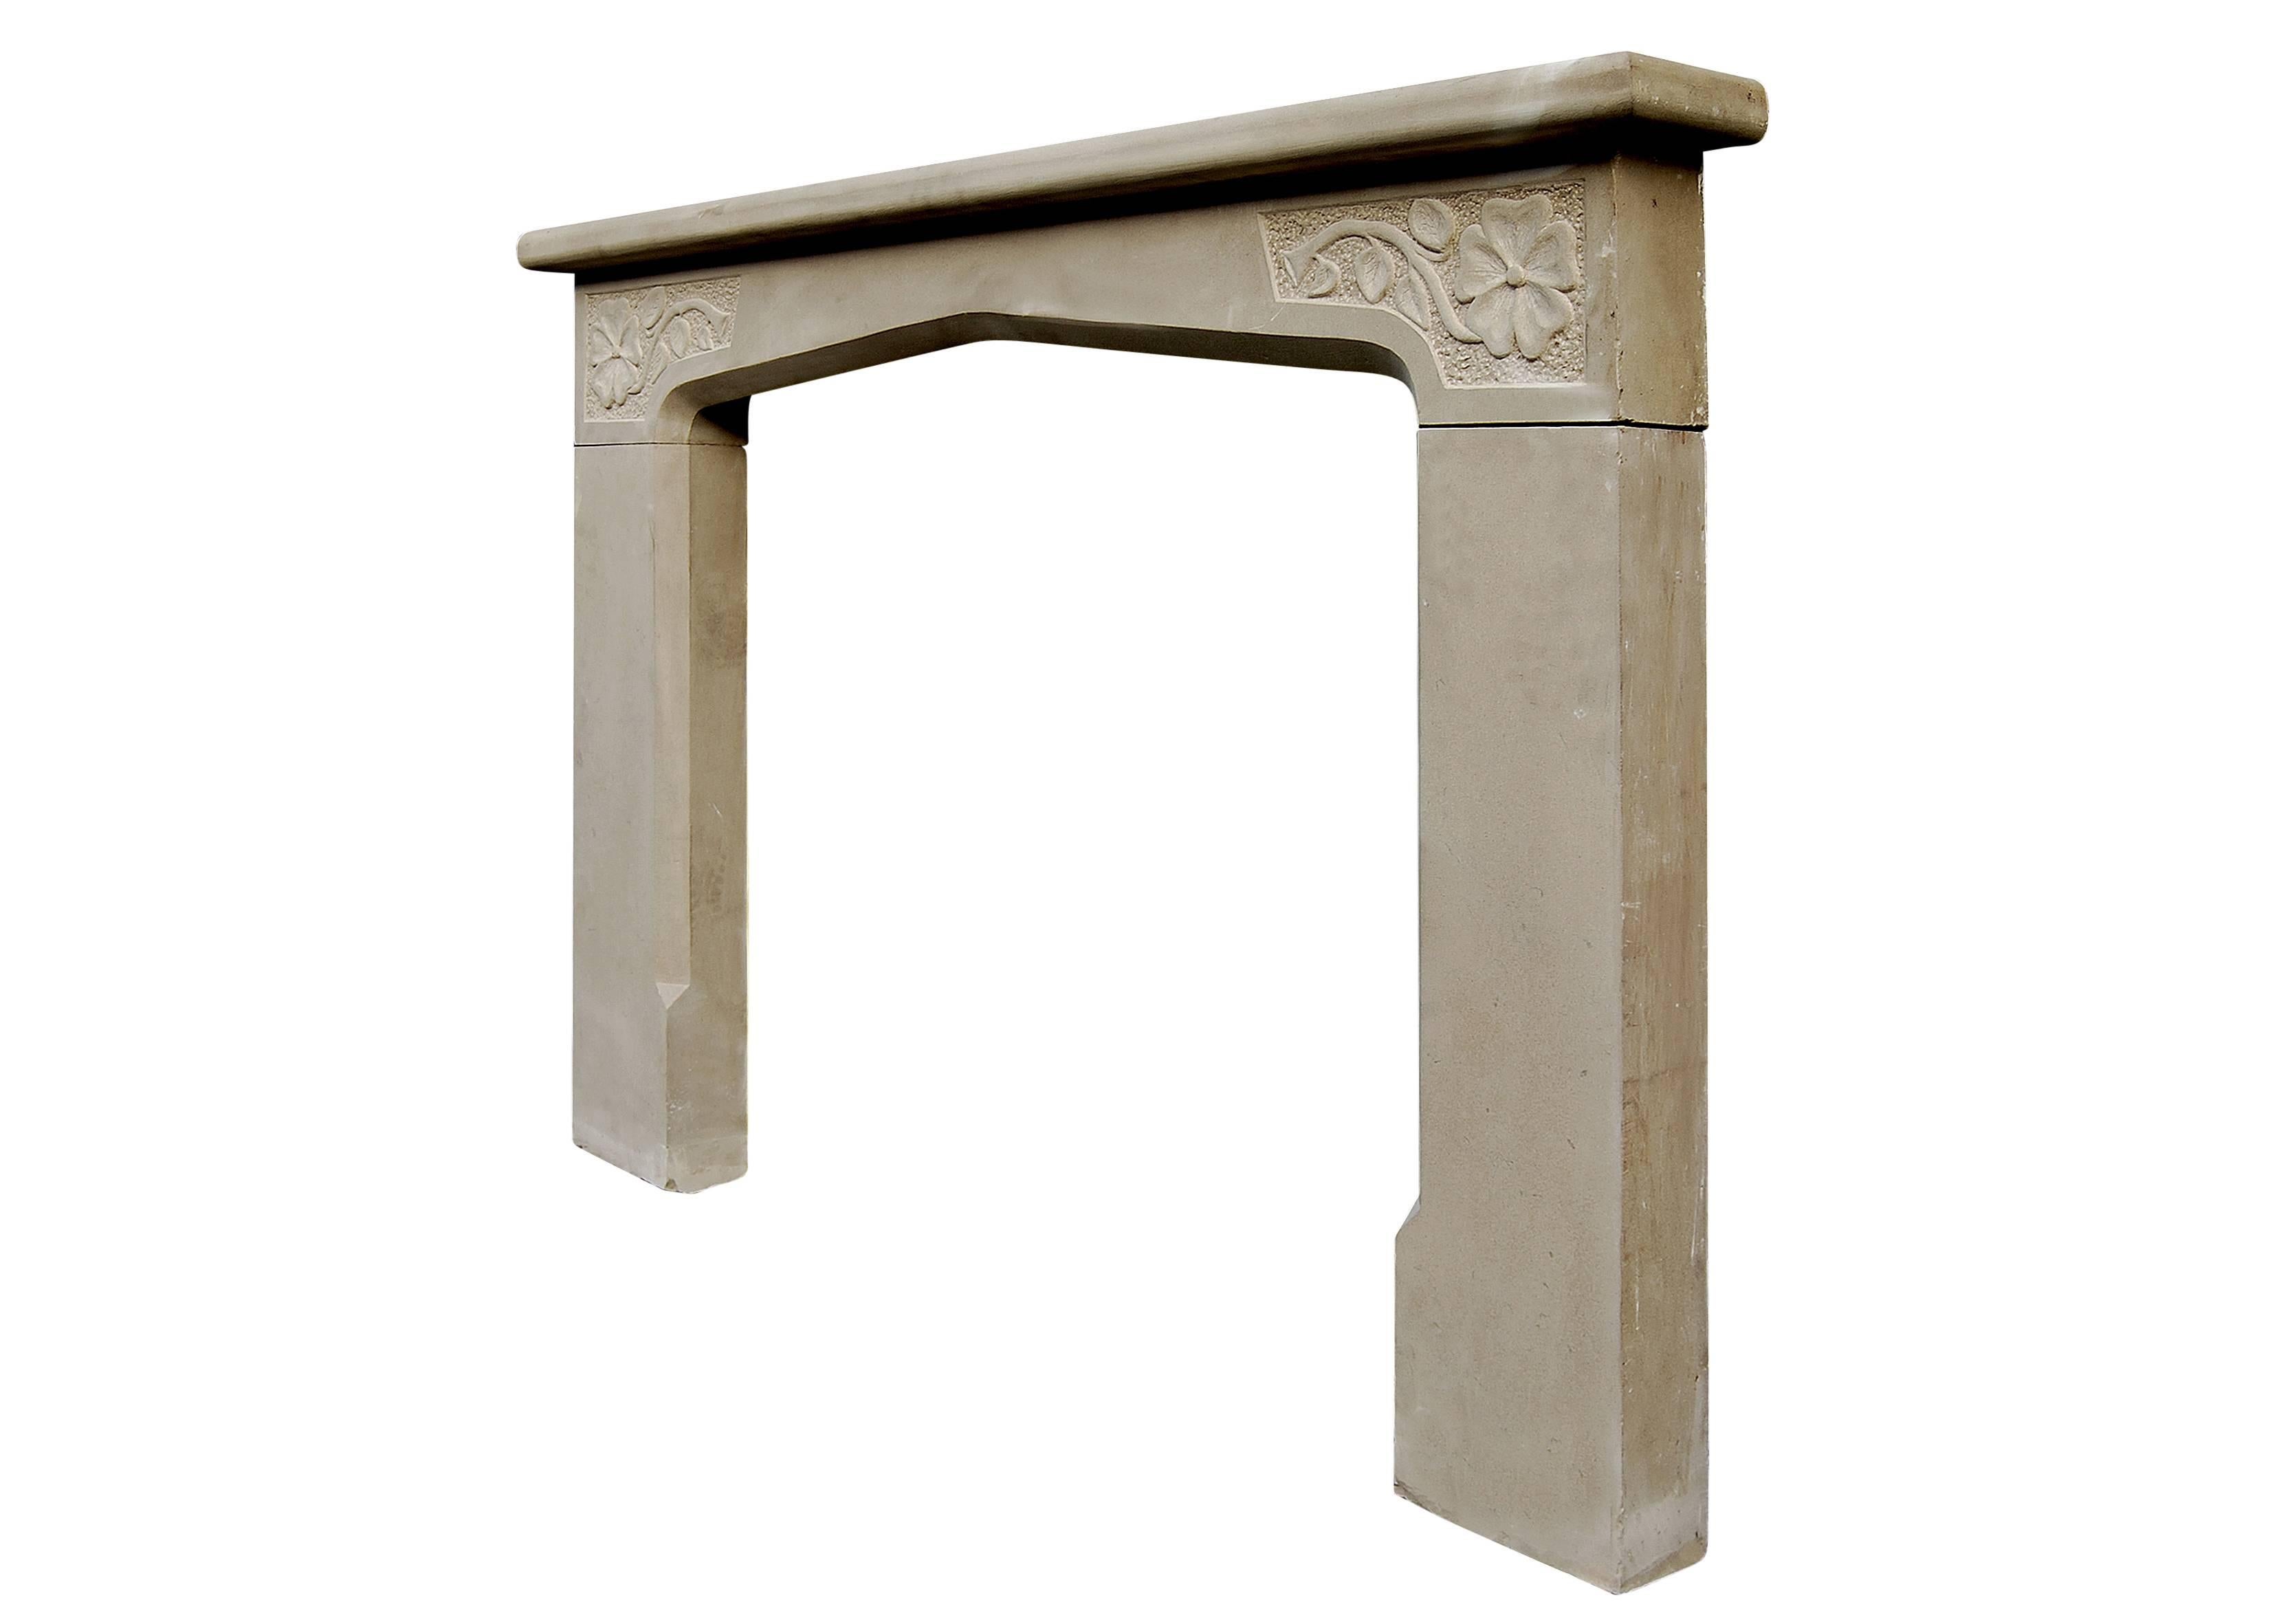 A 20th century limestone English fireplace with carved Tudor roses to frieze, plain jambs with bevelled inside edge.
Measures:
Shelf width 1524 mm 60 in.
Overall height 1054 mm 41 ½ in.
Opening height 902 mm 35 ½ in.
Opening width 1010 mm 39 ¾